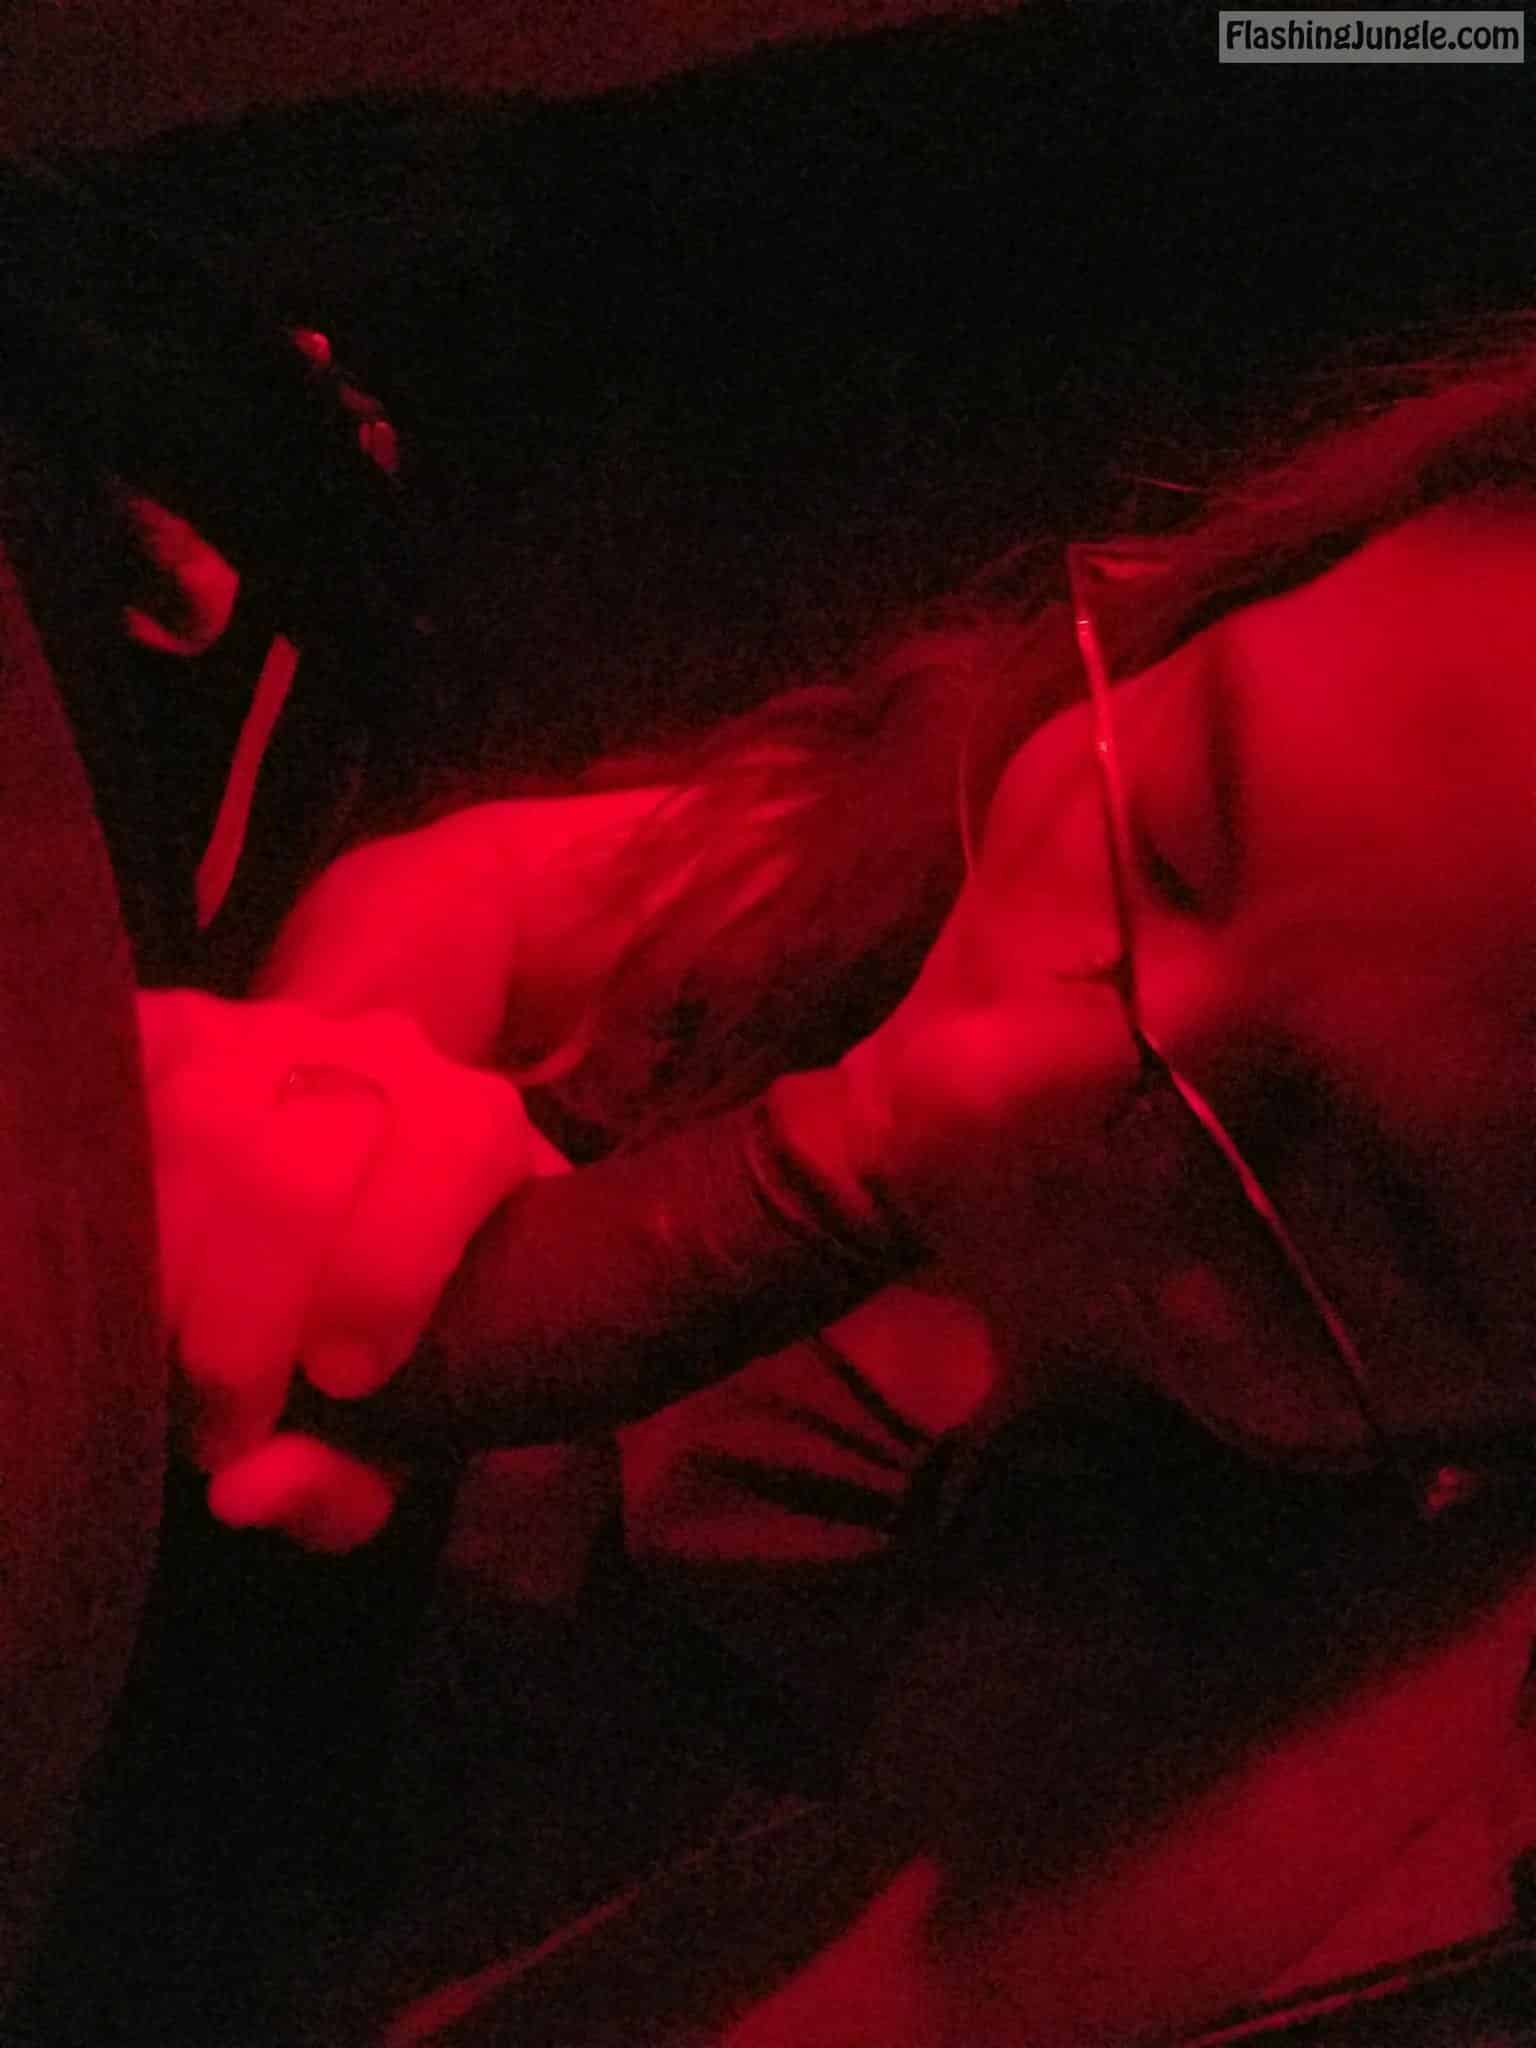 sexting hotwife gallery - Hotwife Blowjob Under Redlight POV Hotwife with glasses sucking black cock under redlight. - Hotwife Pics